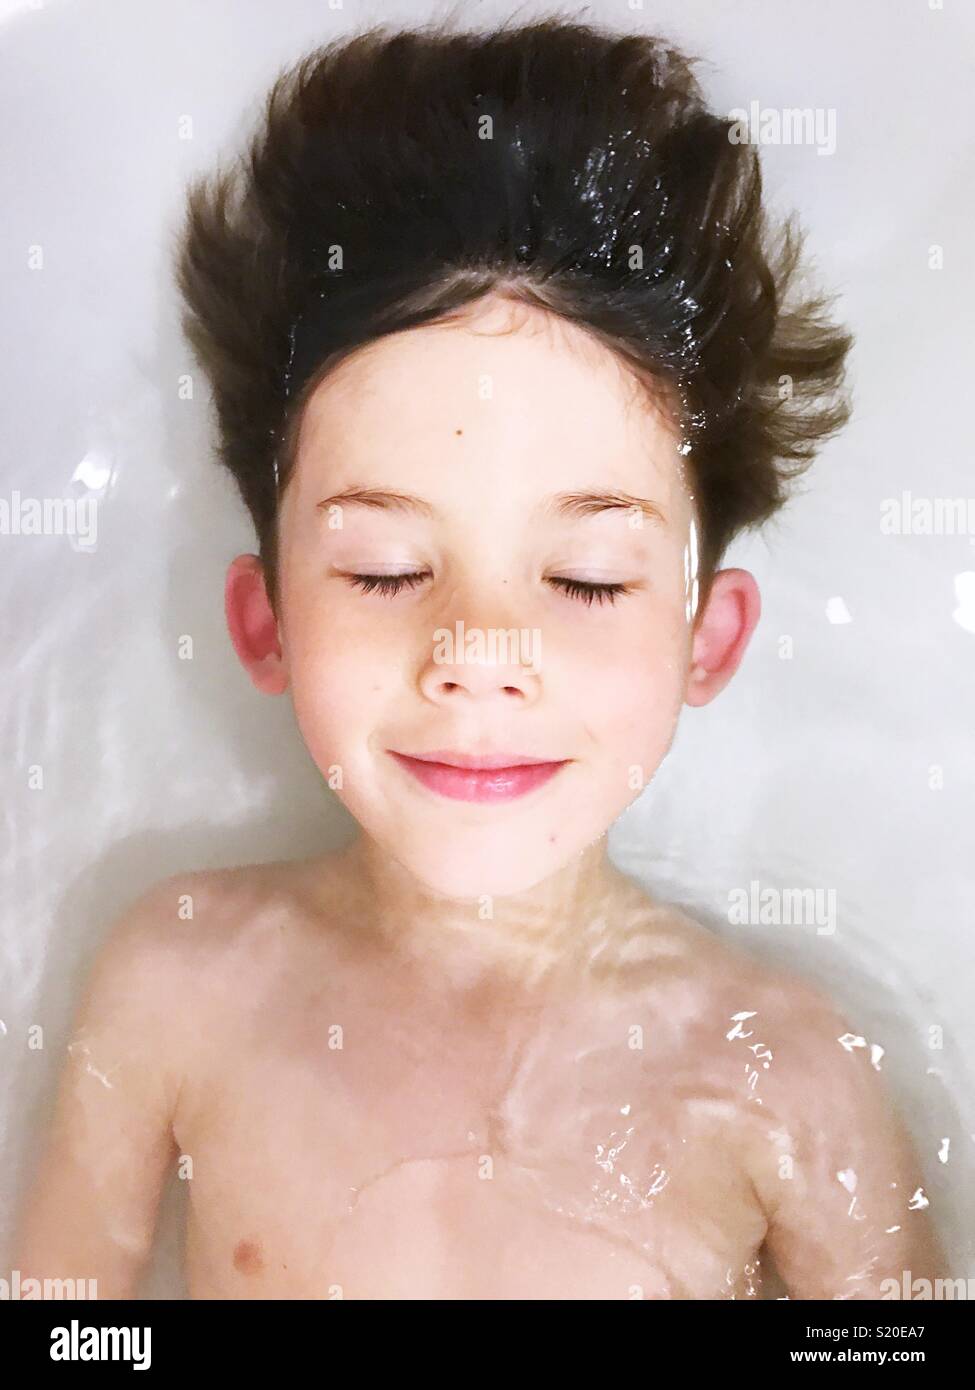 The happy face of a boy taking a relaxing bath Stock Photo